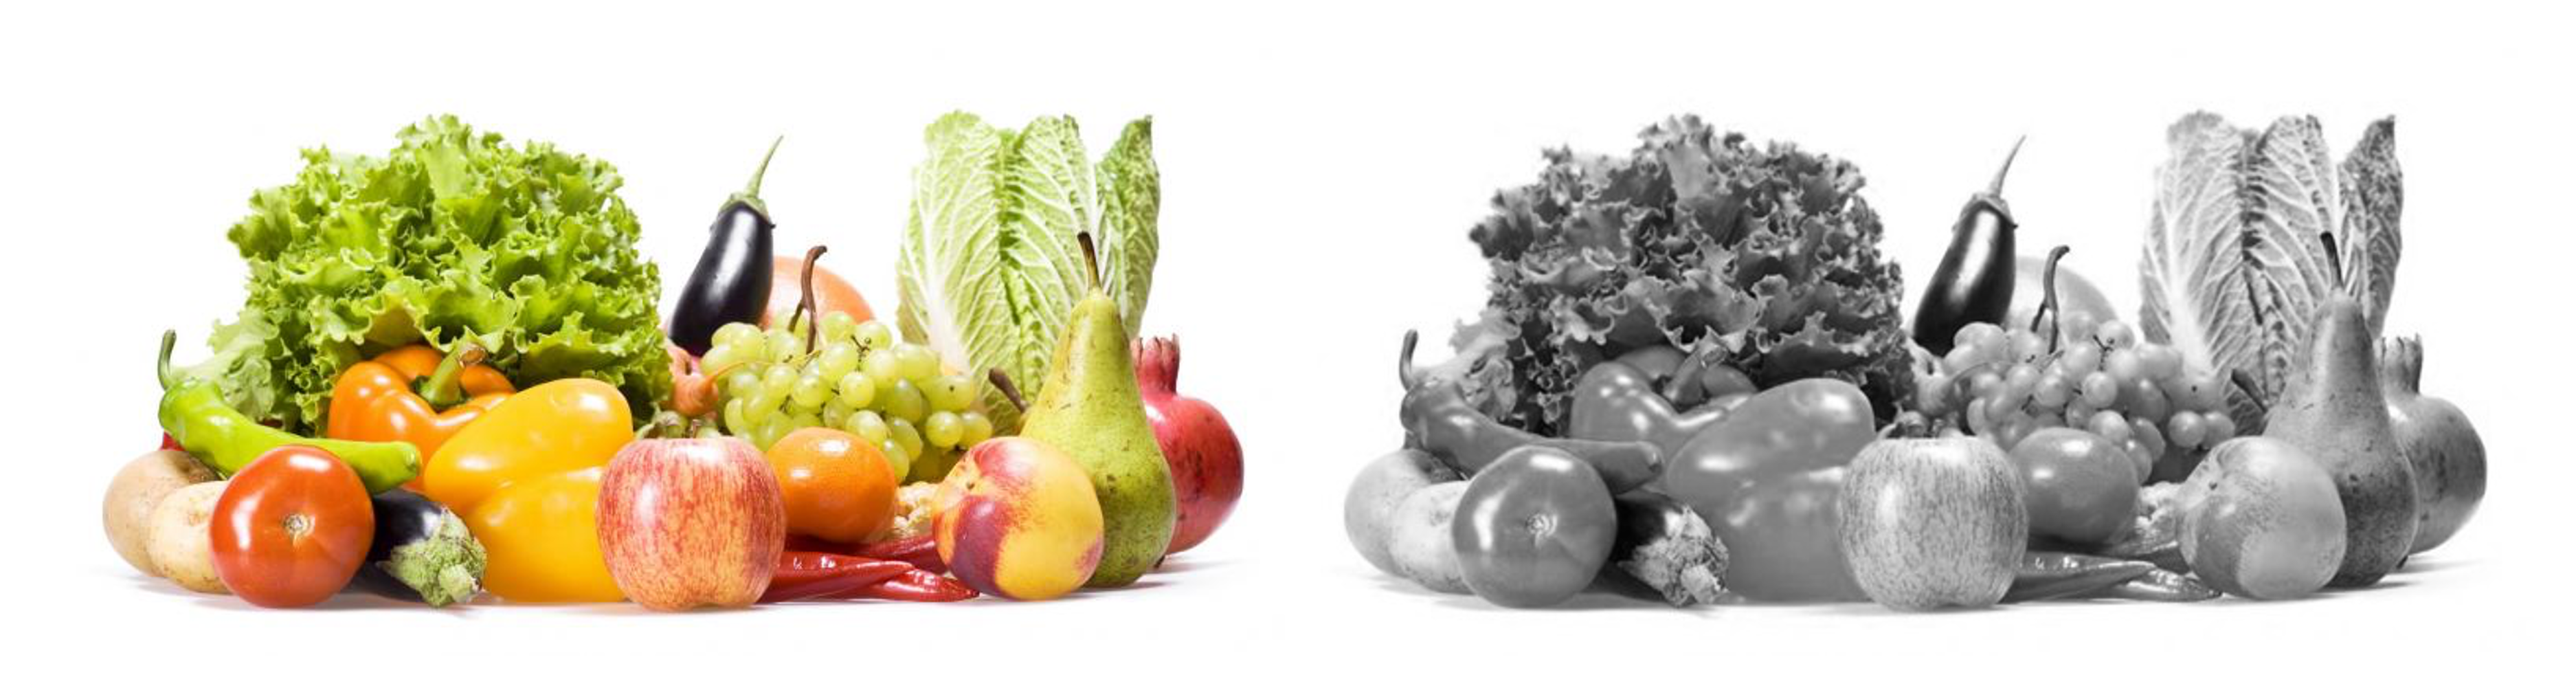 Colourful fruits and vegetables on left and same fruits and vegetables in greyscale